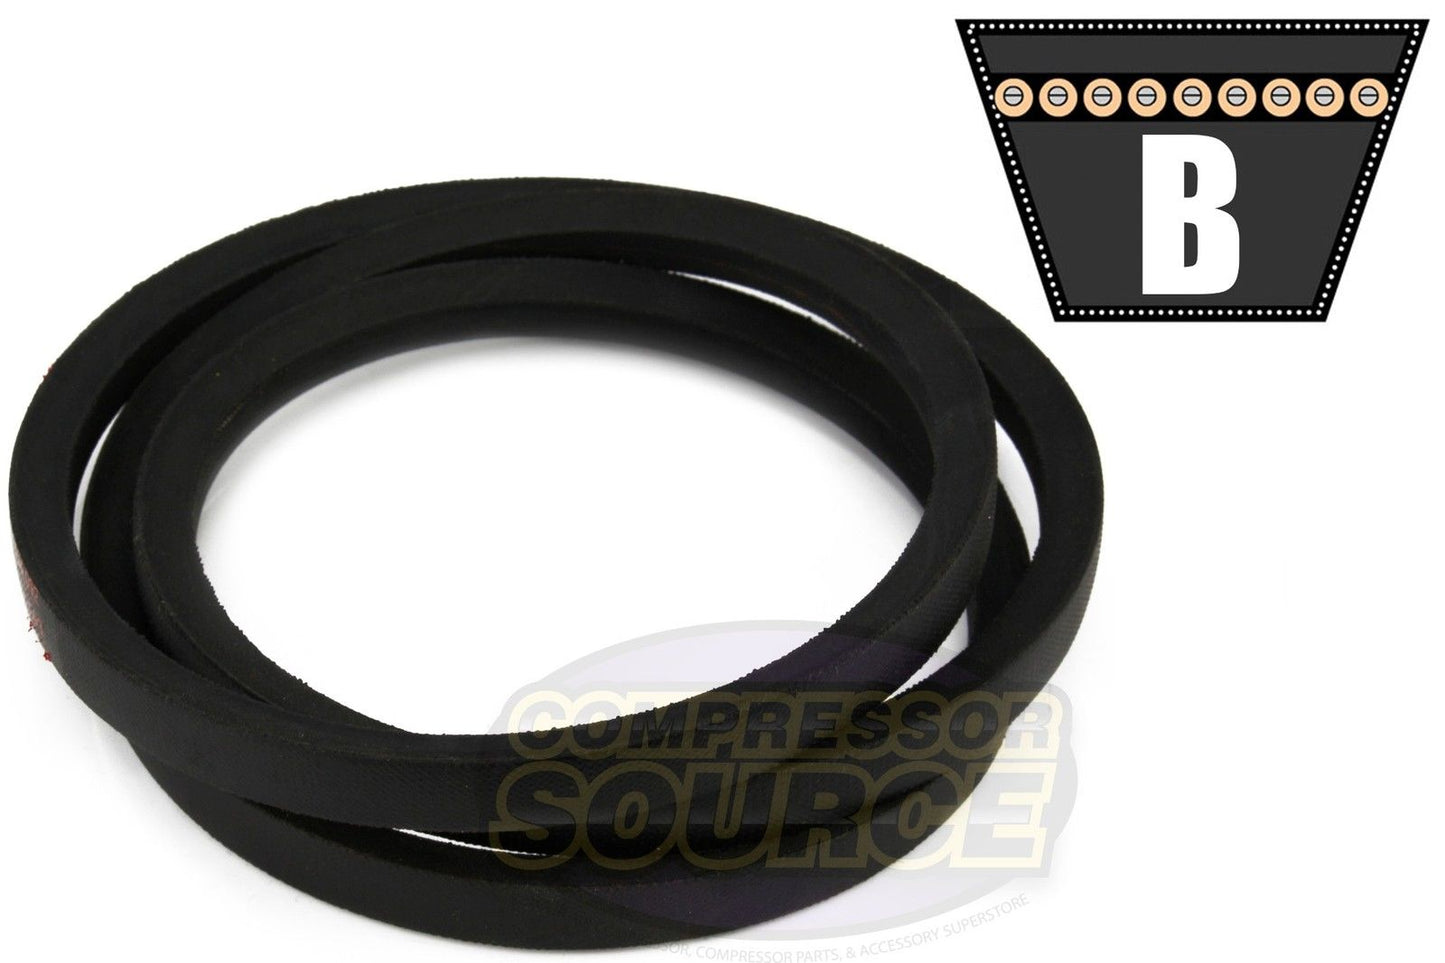 B69 Replacement High Quality Industrial & Lawn Mower 5/8" x 72"  V Belt 5L720